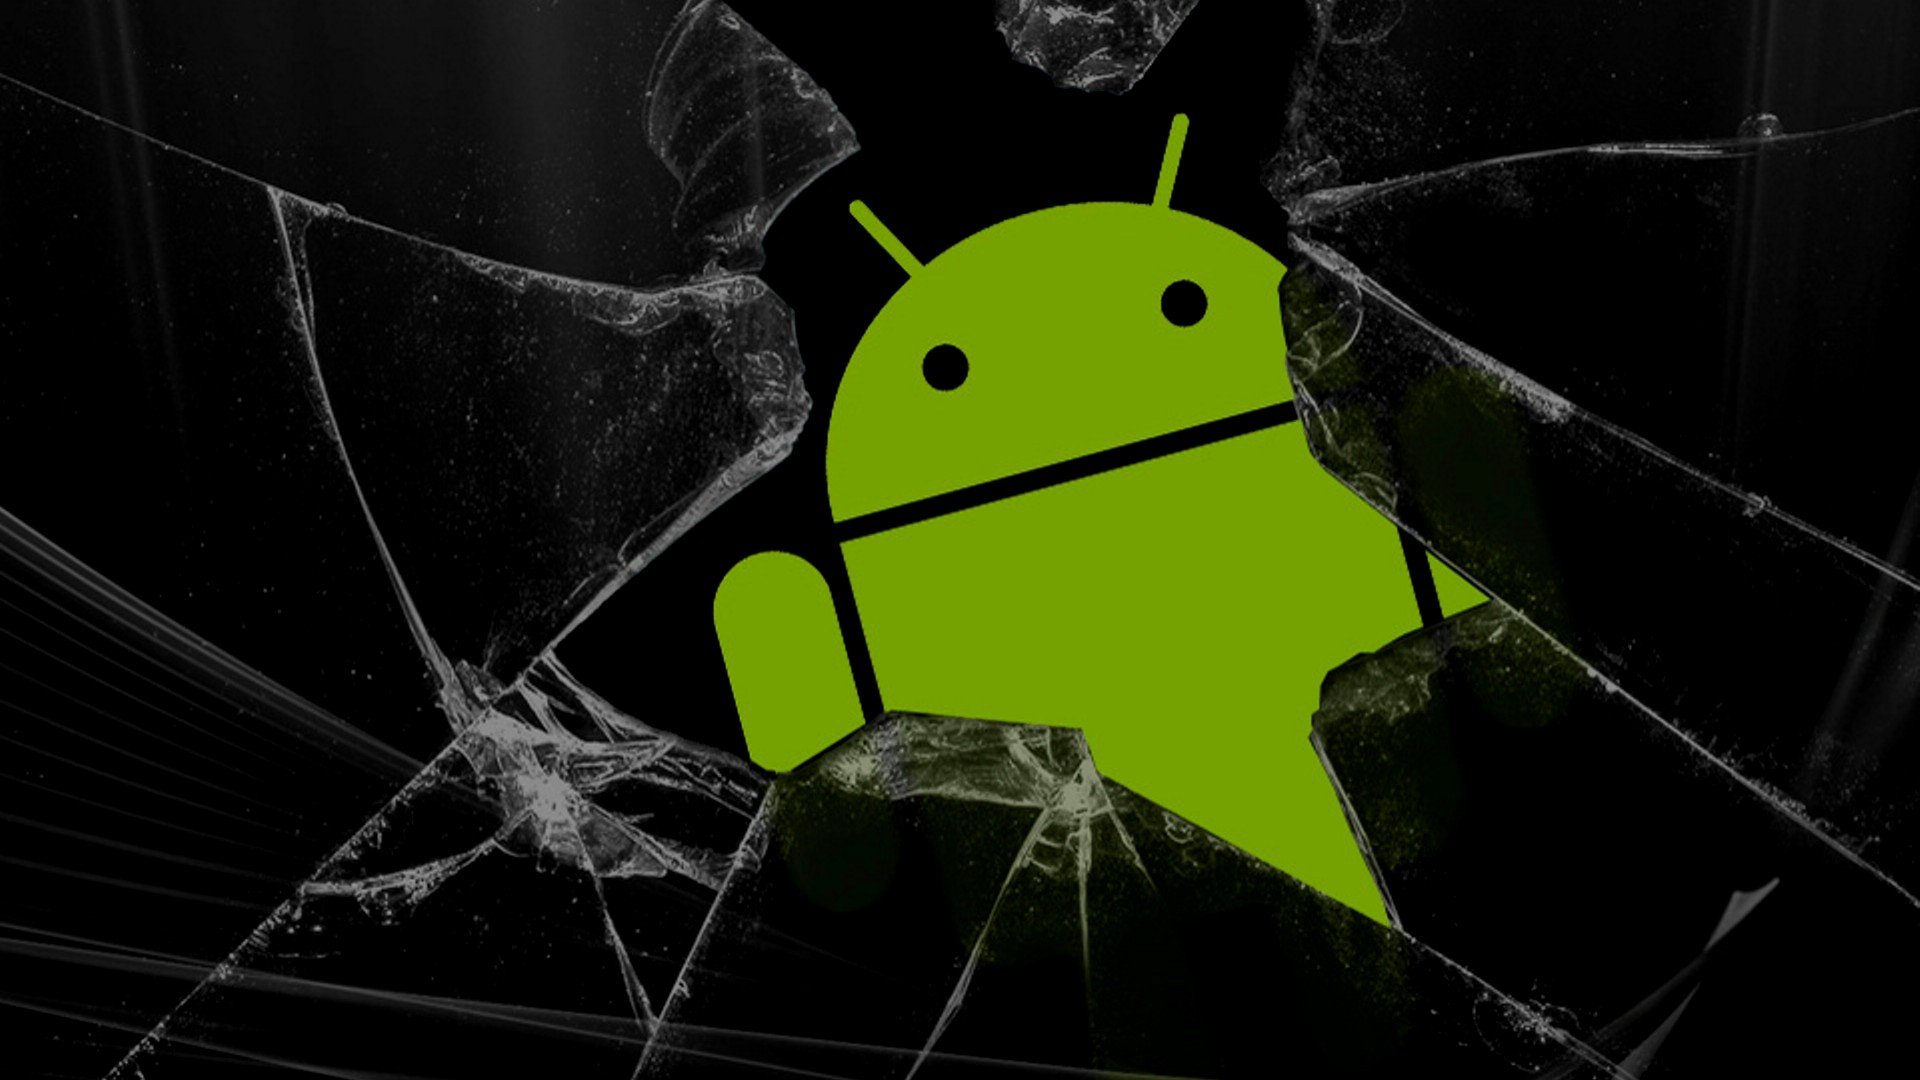 google android robot hd wallpapers google android robot hd wallpapers 1920x1080